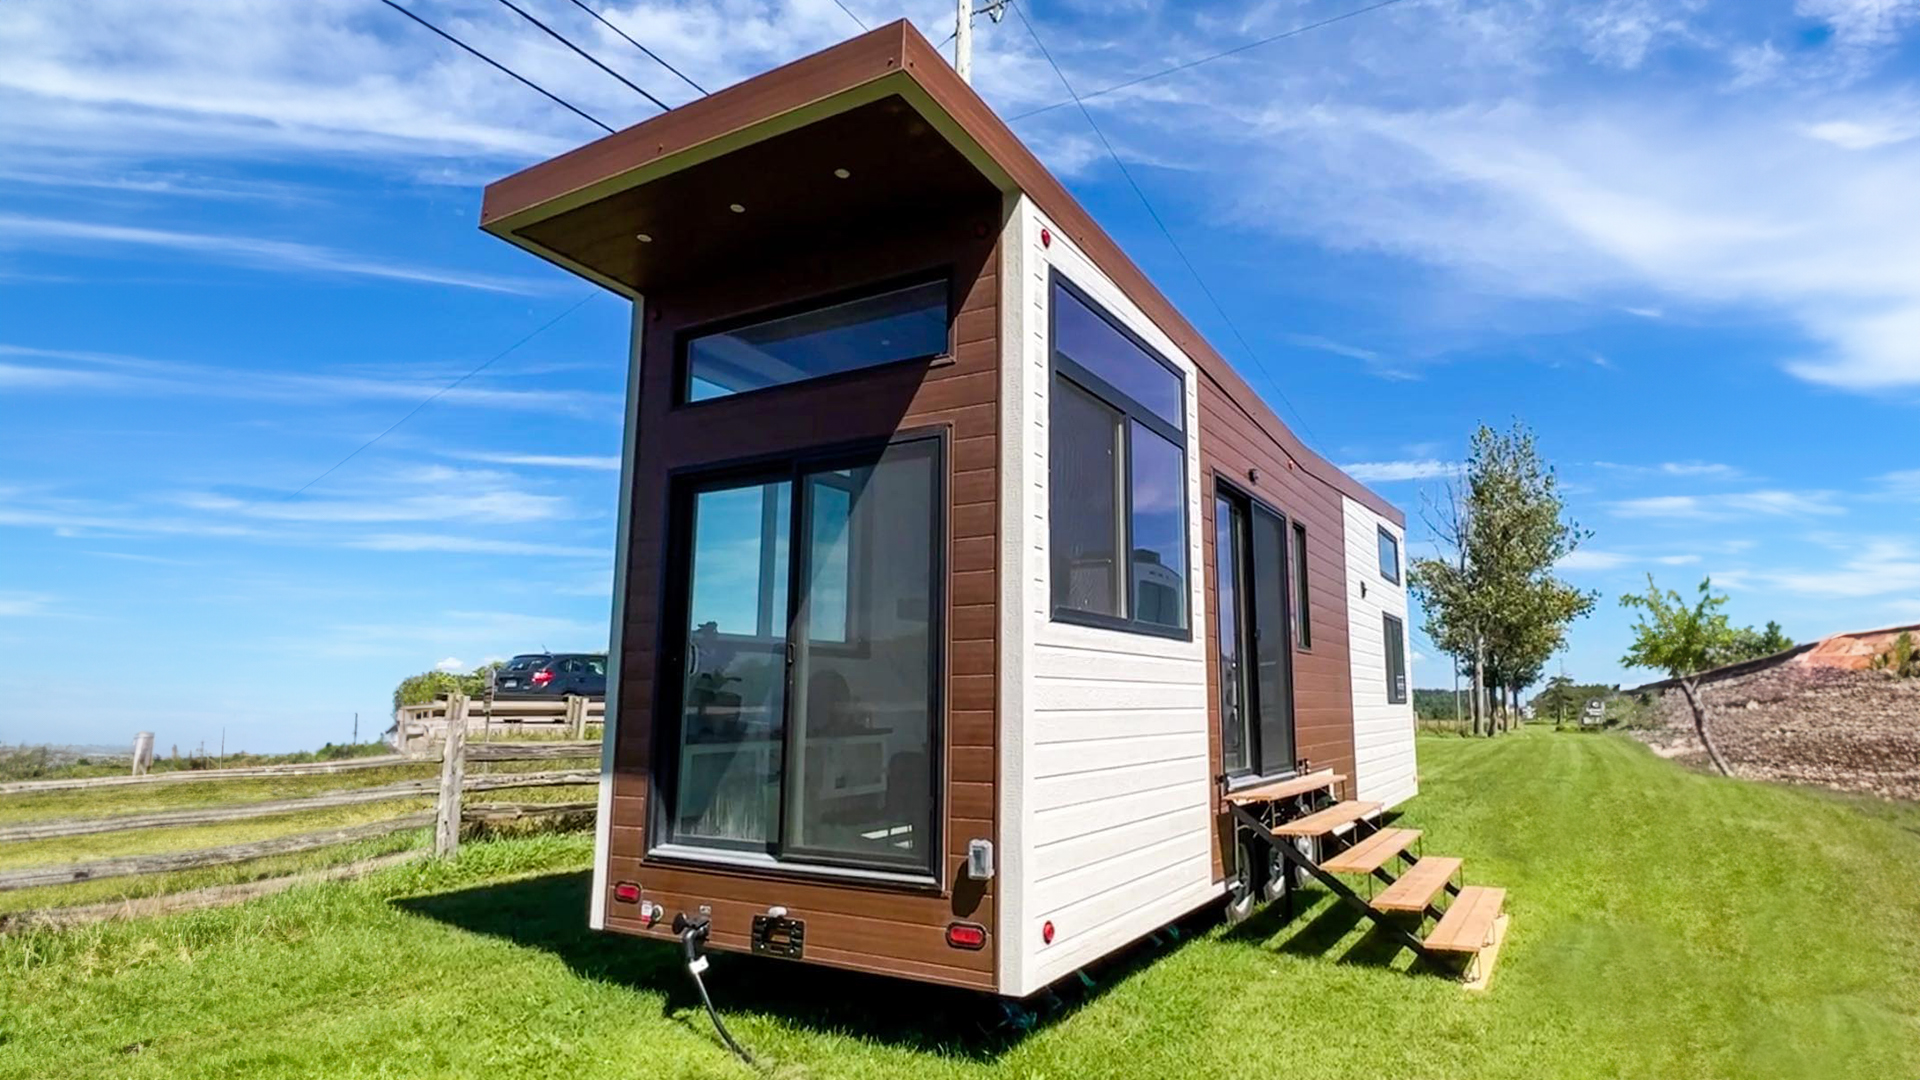 Exposed: The $160k Tiny Home Scam That Forced One Man to Leave ‘Immediately’